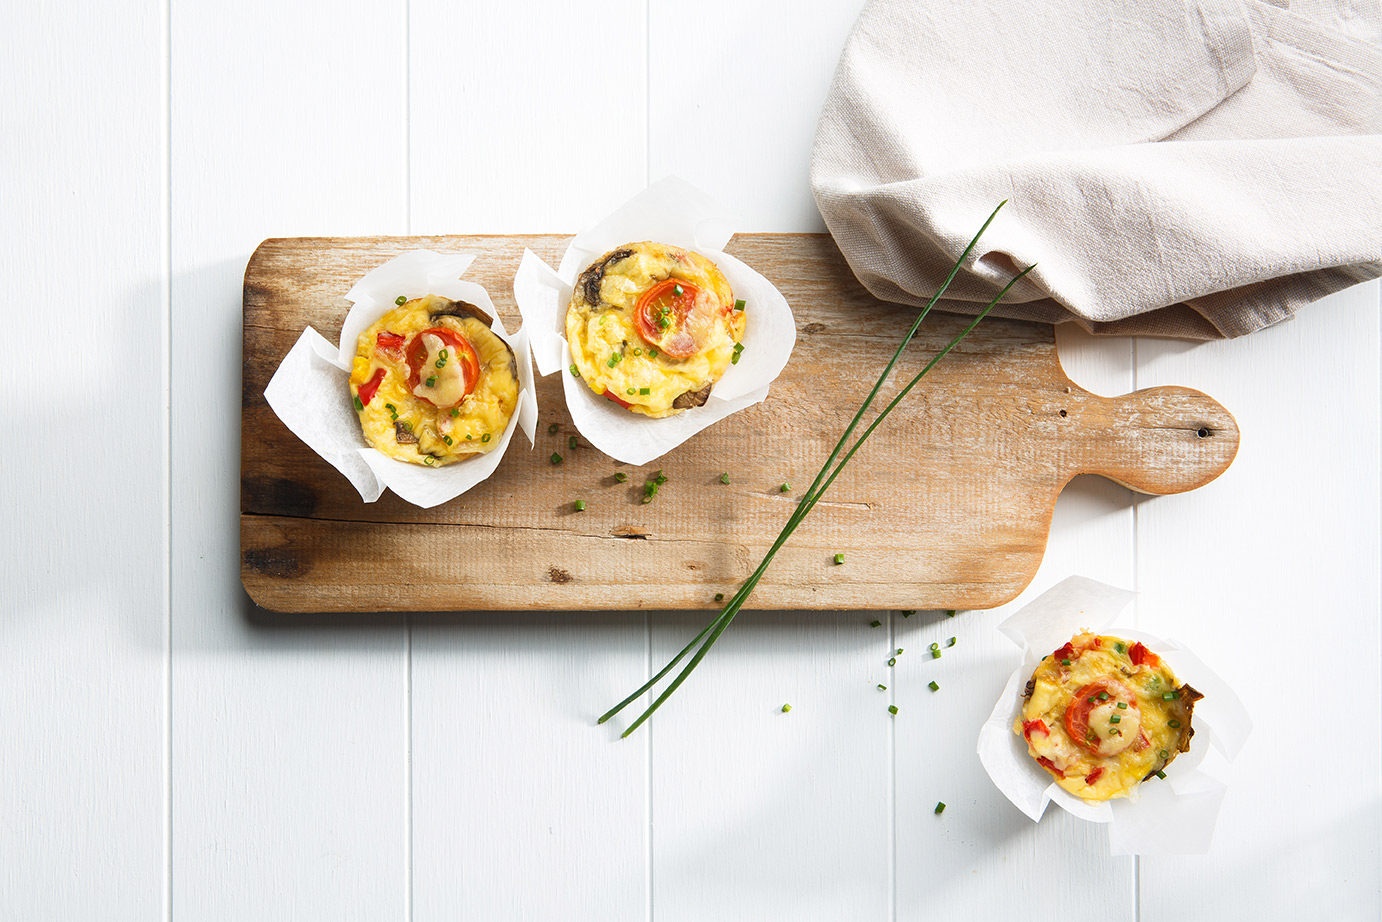 Image of three mini crustless chicken quiches on a wooden chopping board with chives and a white cloth napkin on the side